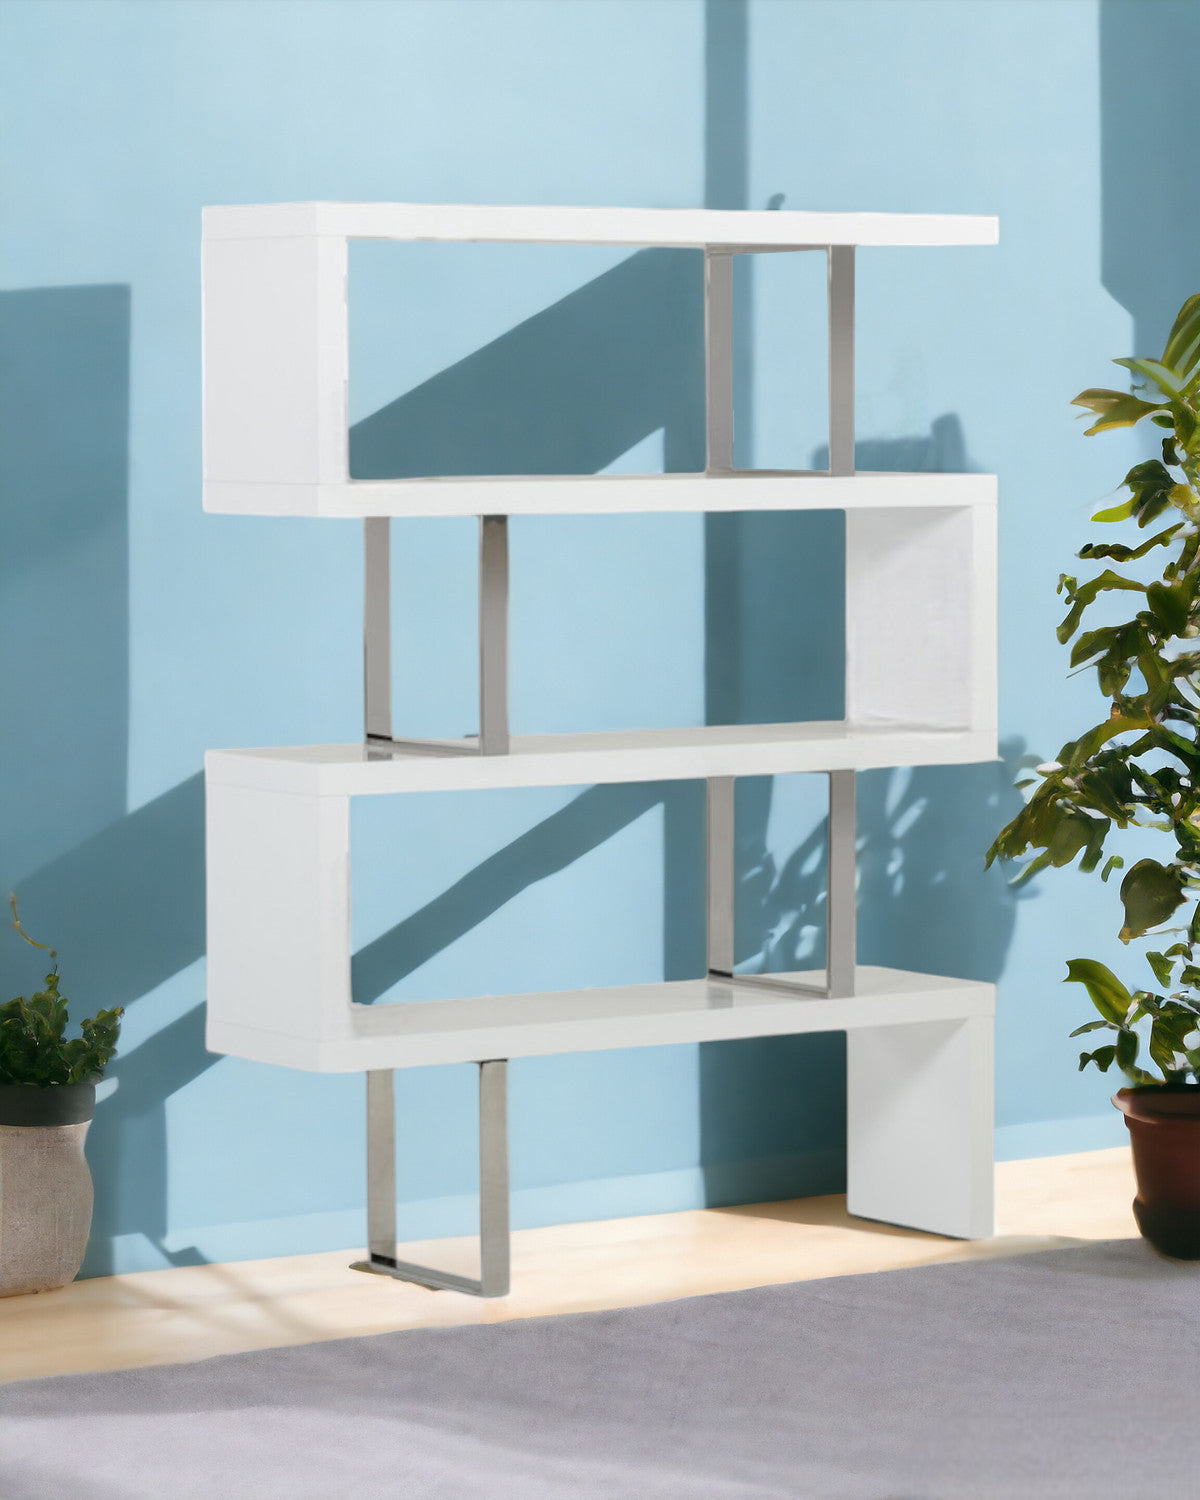 67" White Stainless Steel Four Tier Geometric Bookcase